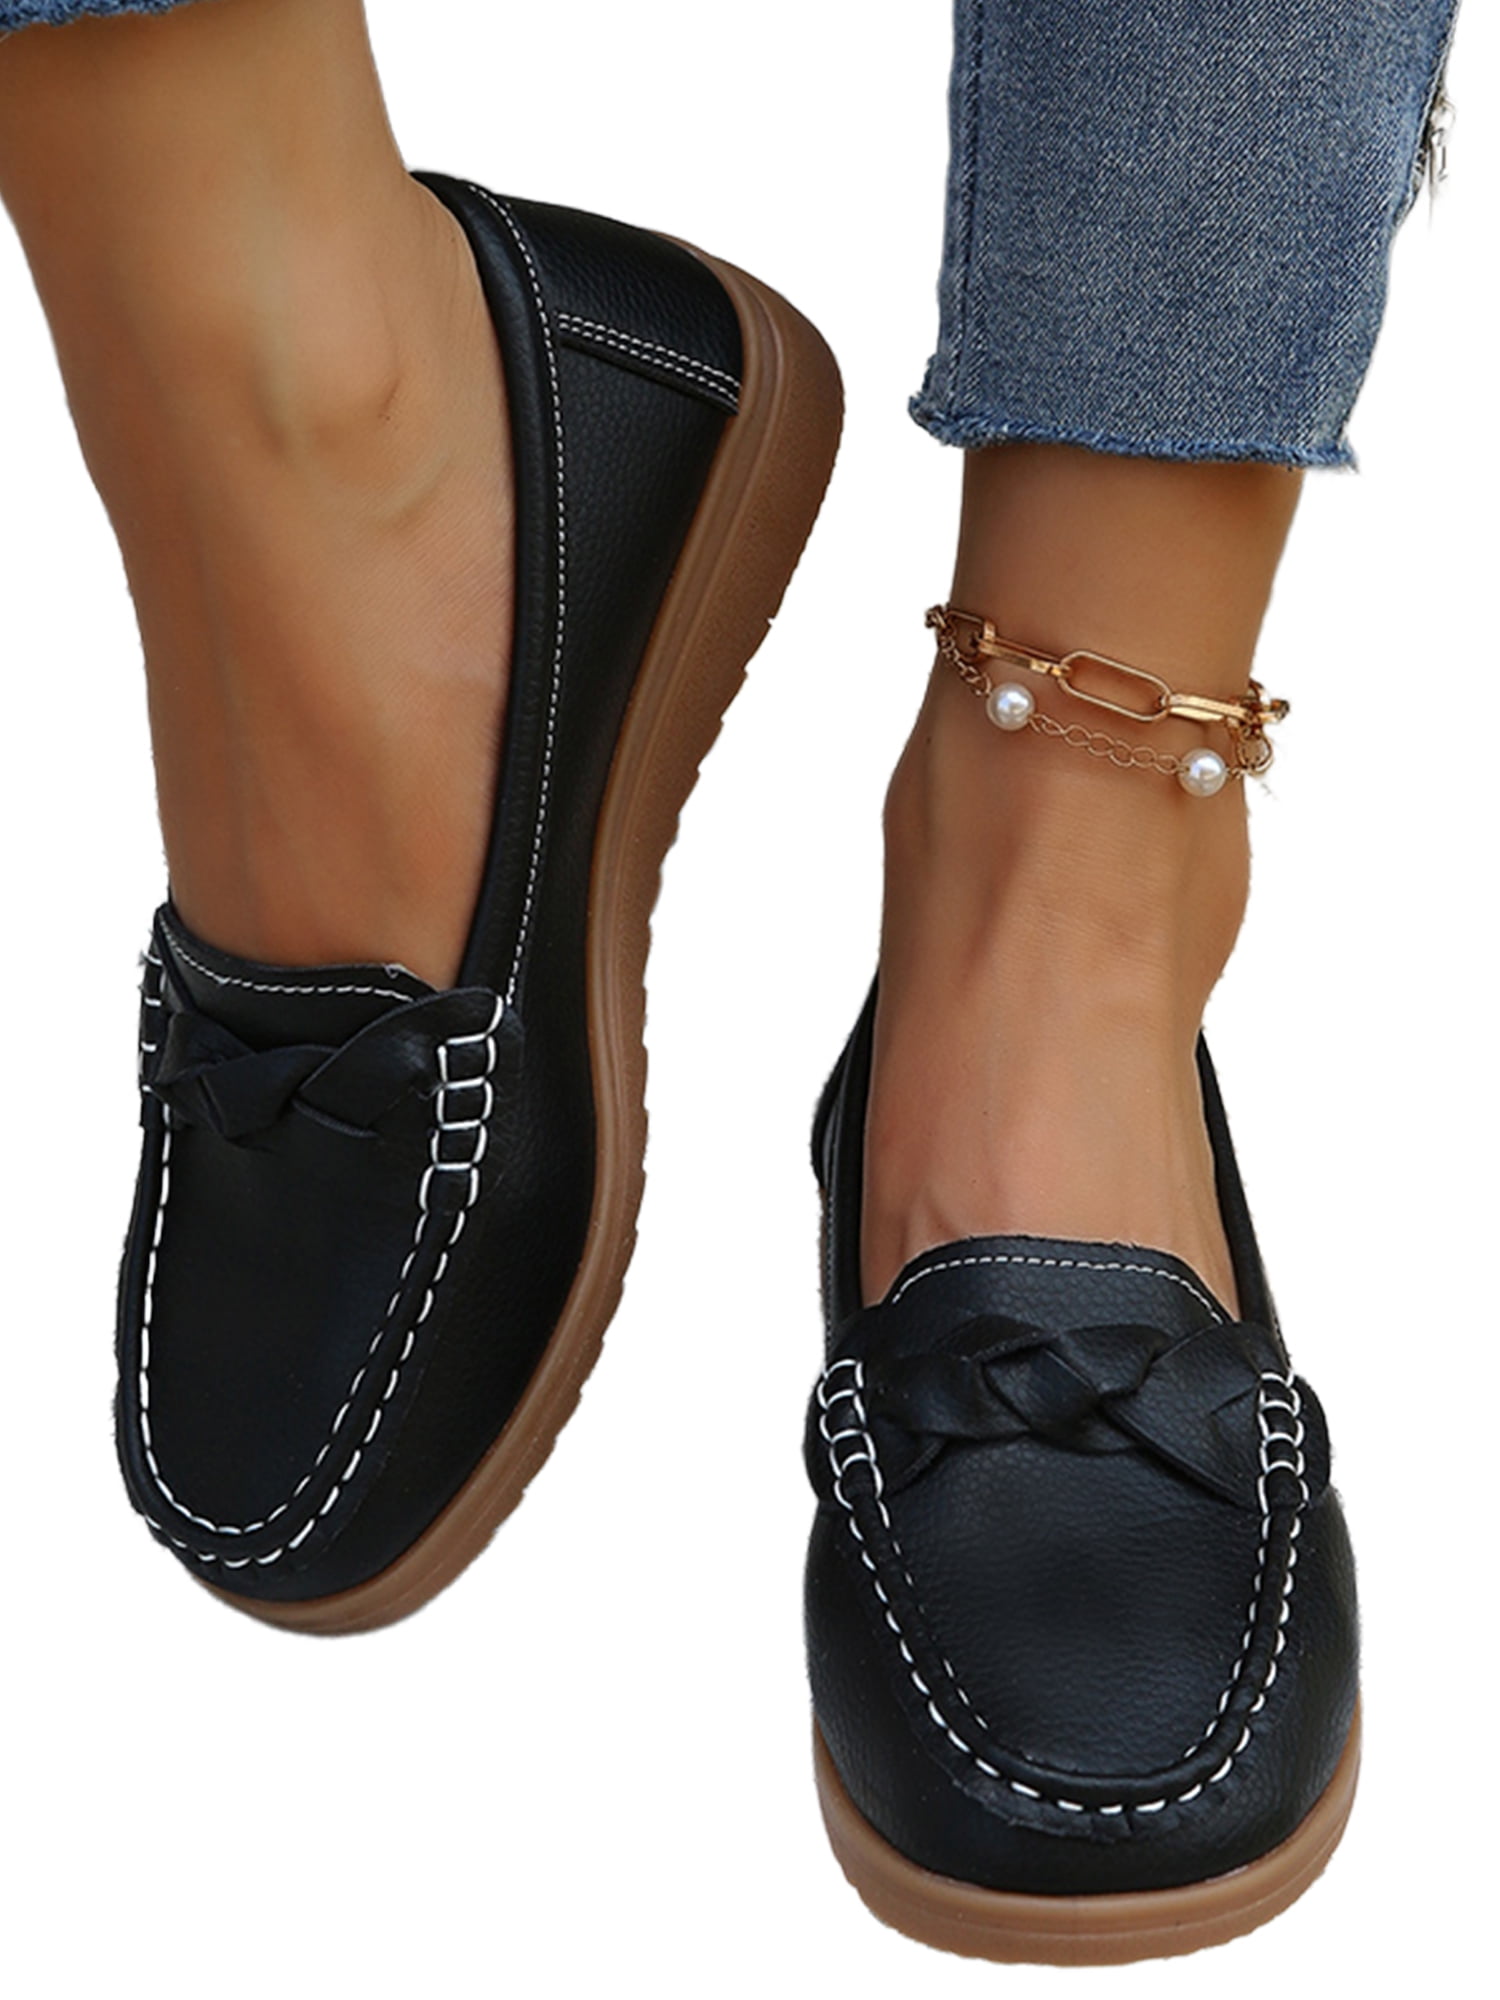 Womens Low Heel Wedge Comfort Boat Shoes Loafers | AjvaniShoes.com